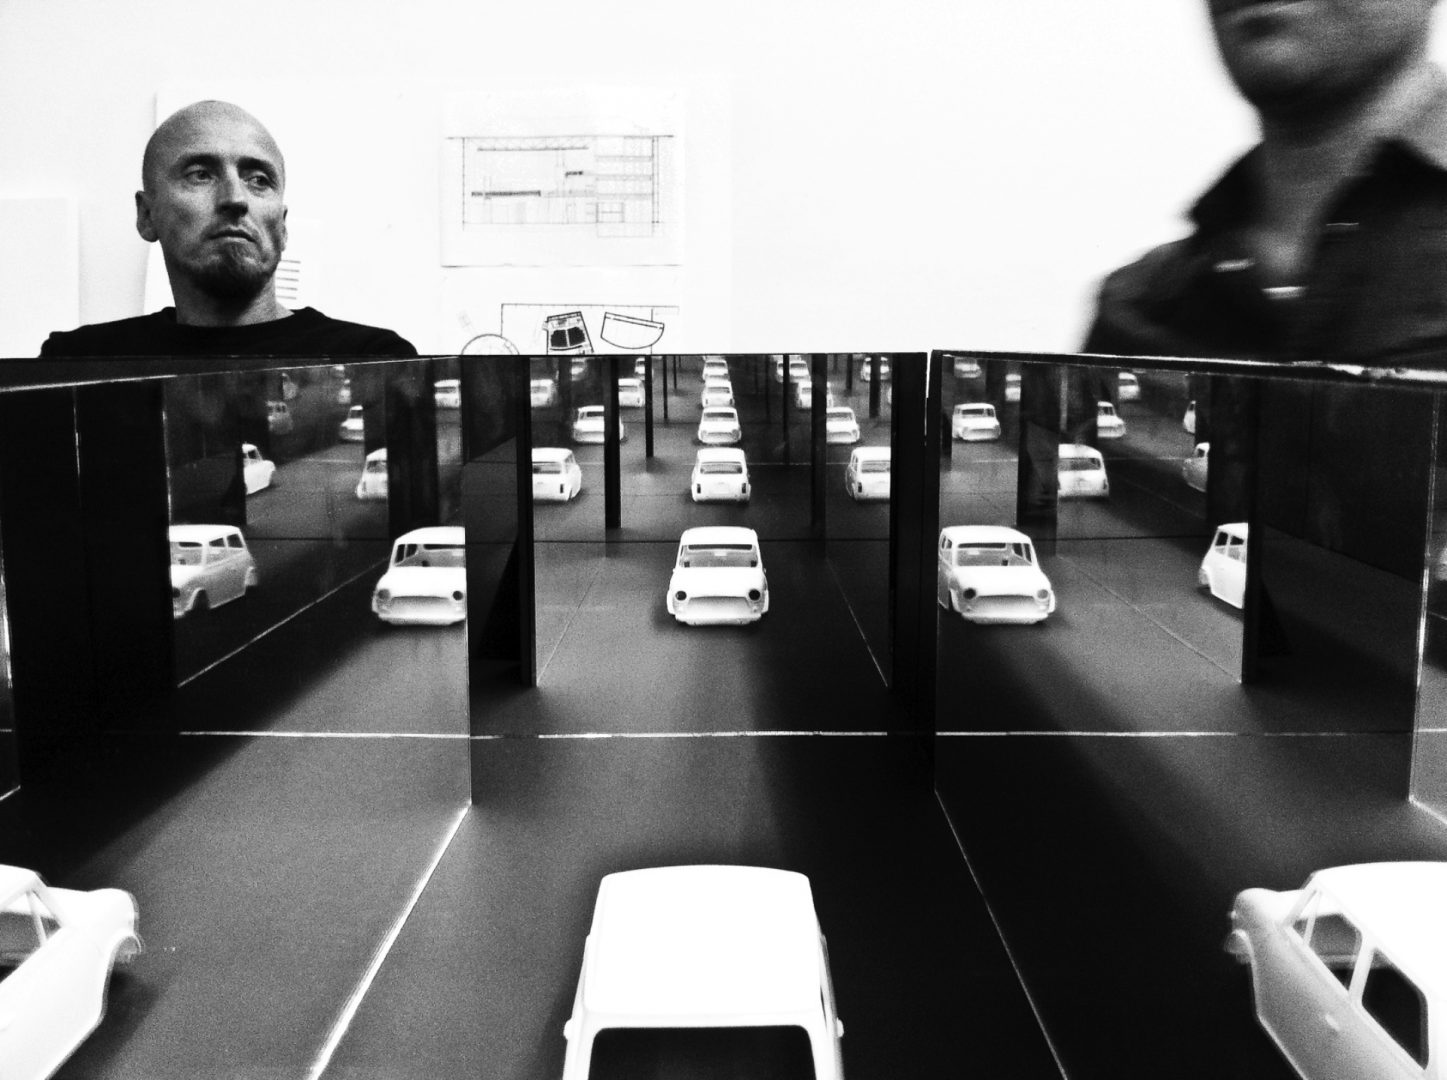 Image in black and white of the Volkswagen exhibition in miniature form by LOOP Associates